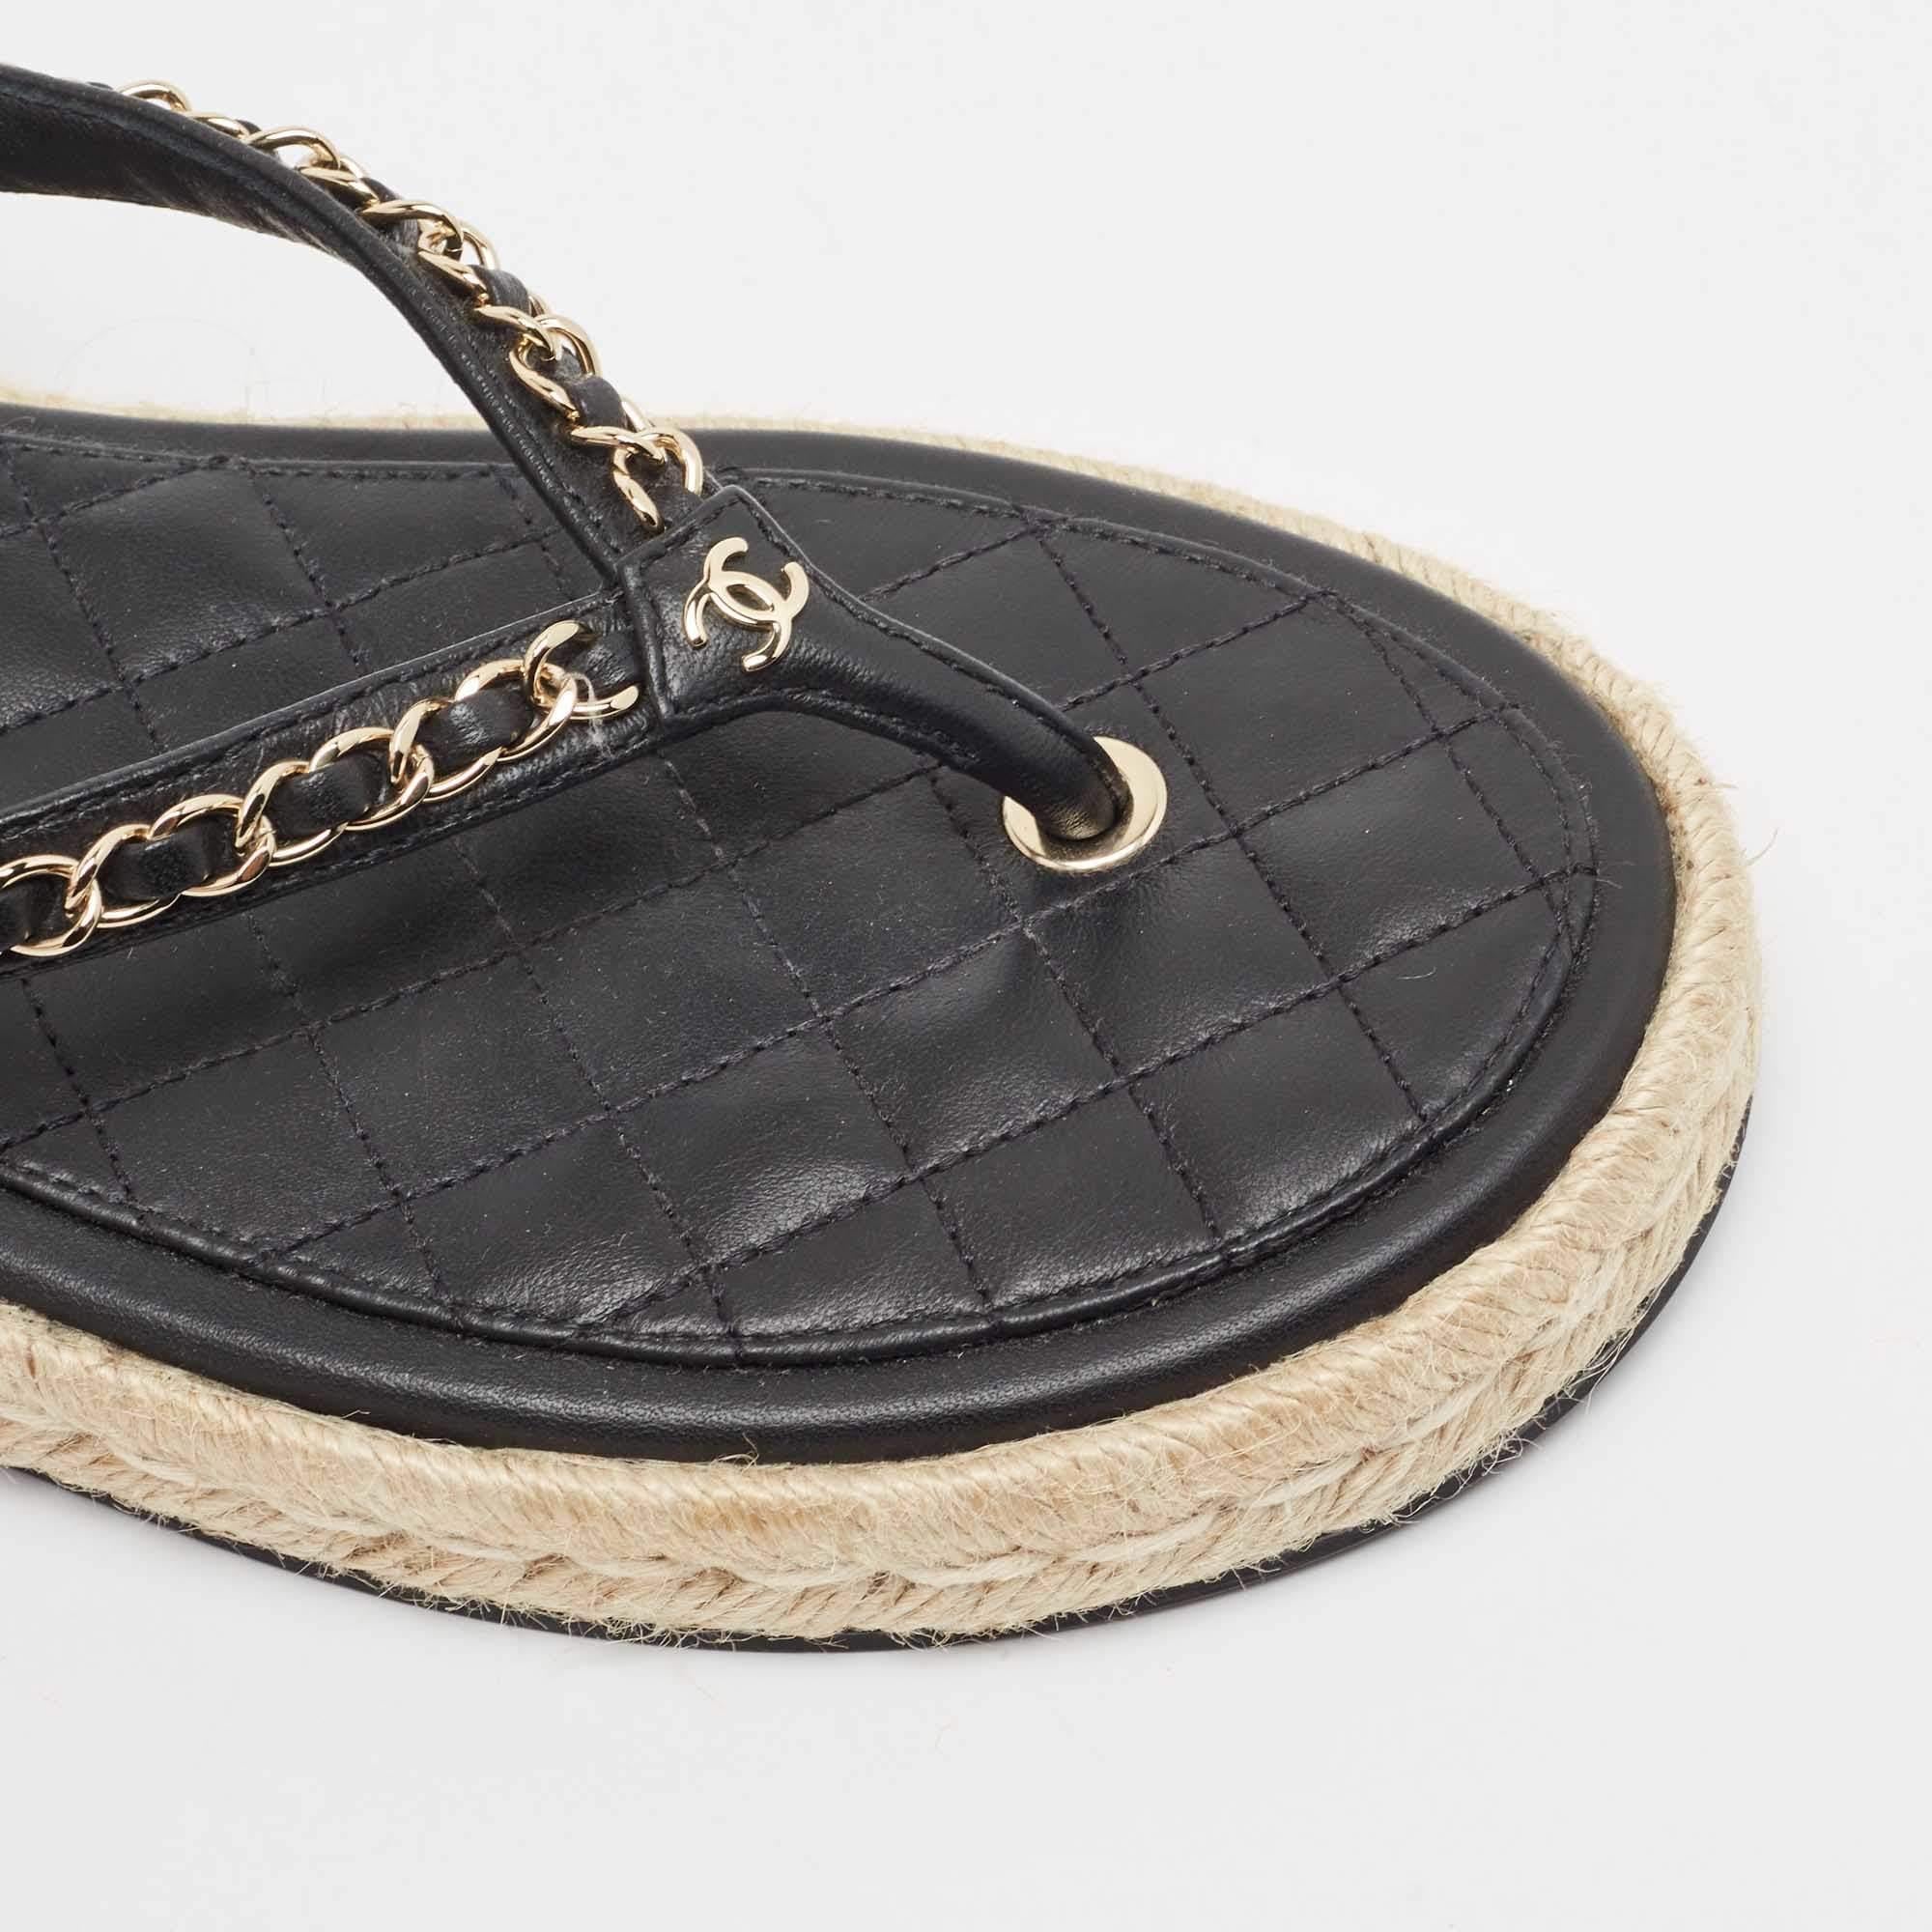 Chanel Black Leather Chain Link CC Espadrille Ankle Strap Thong Sandals Size 41 3